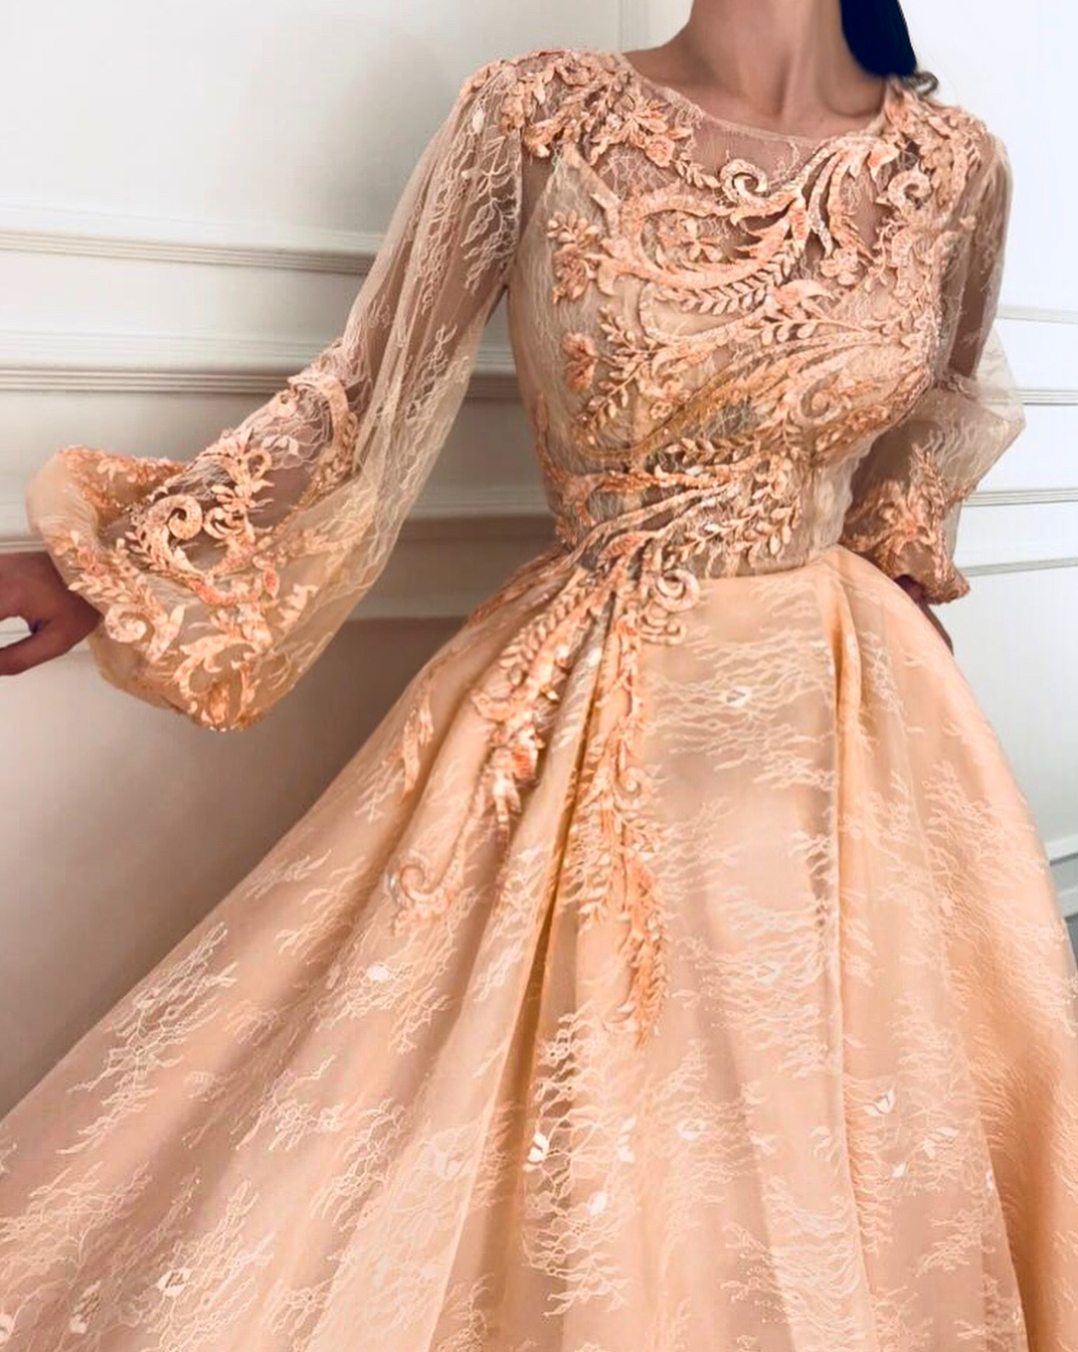 Peach A-Line dress with lace, embroidery and long sleeves